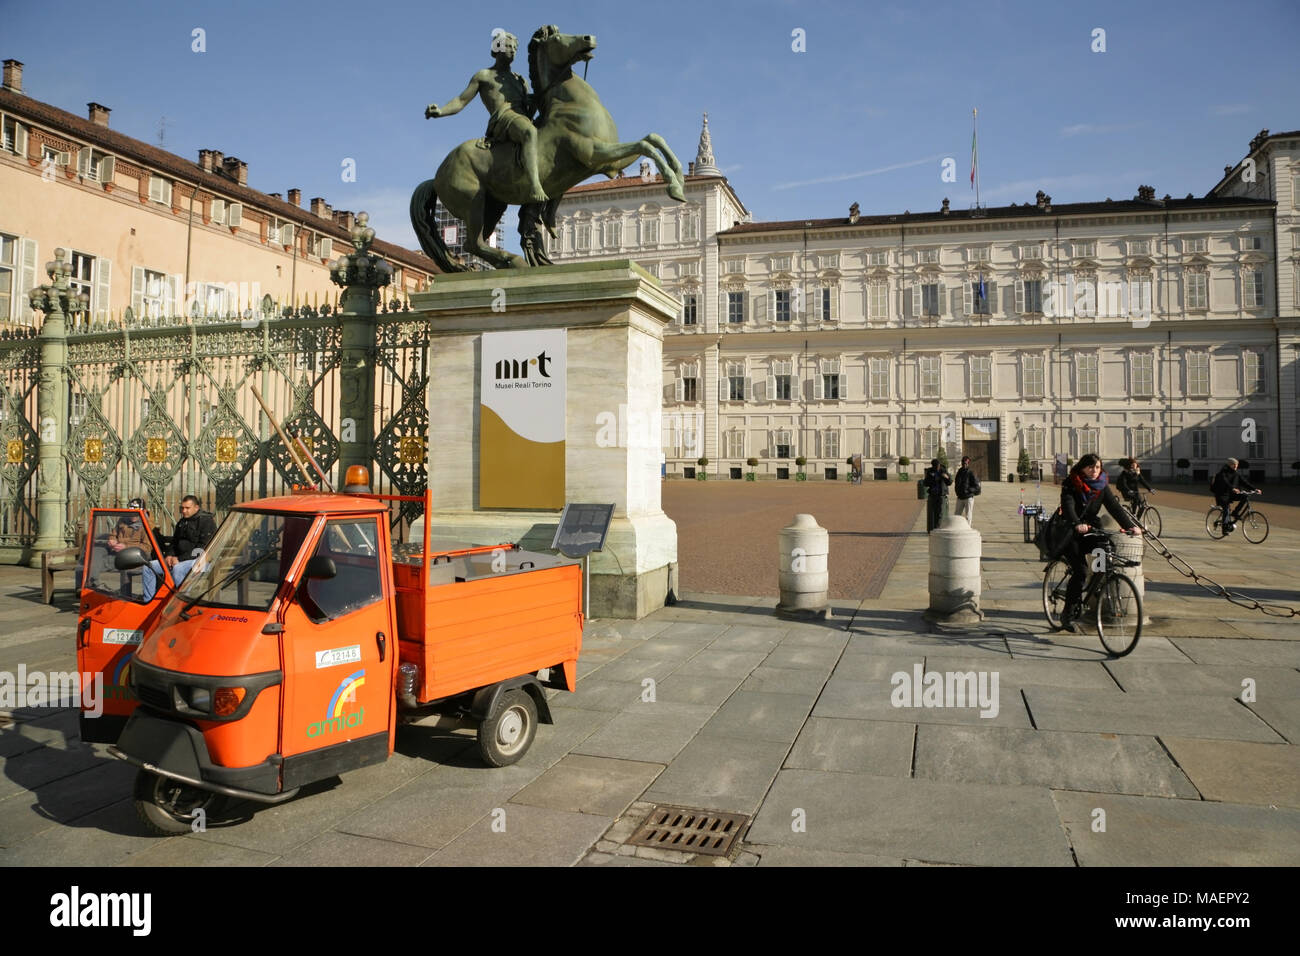 Municipal rubbish collector's Piaggio Ape 50 3-wheeled scooter, in the Piazza Castello with the Piazzetta Reale and Royal Palace behind. Turin, Italy. Stock Photo